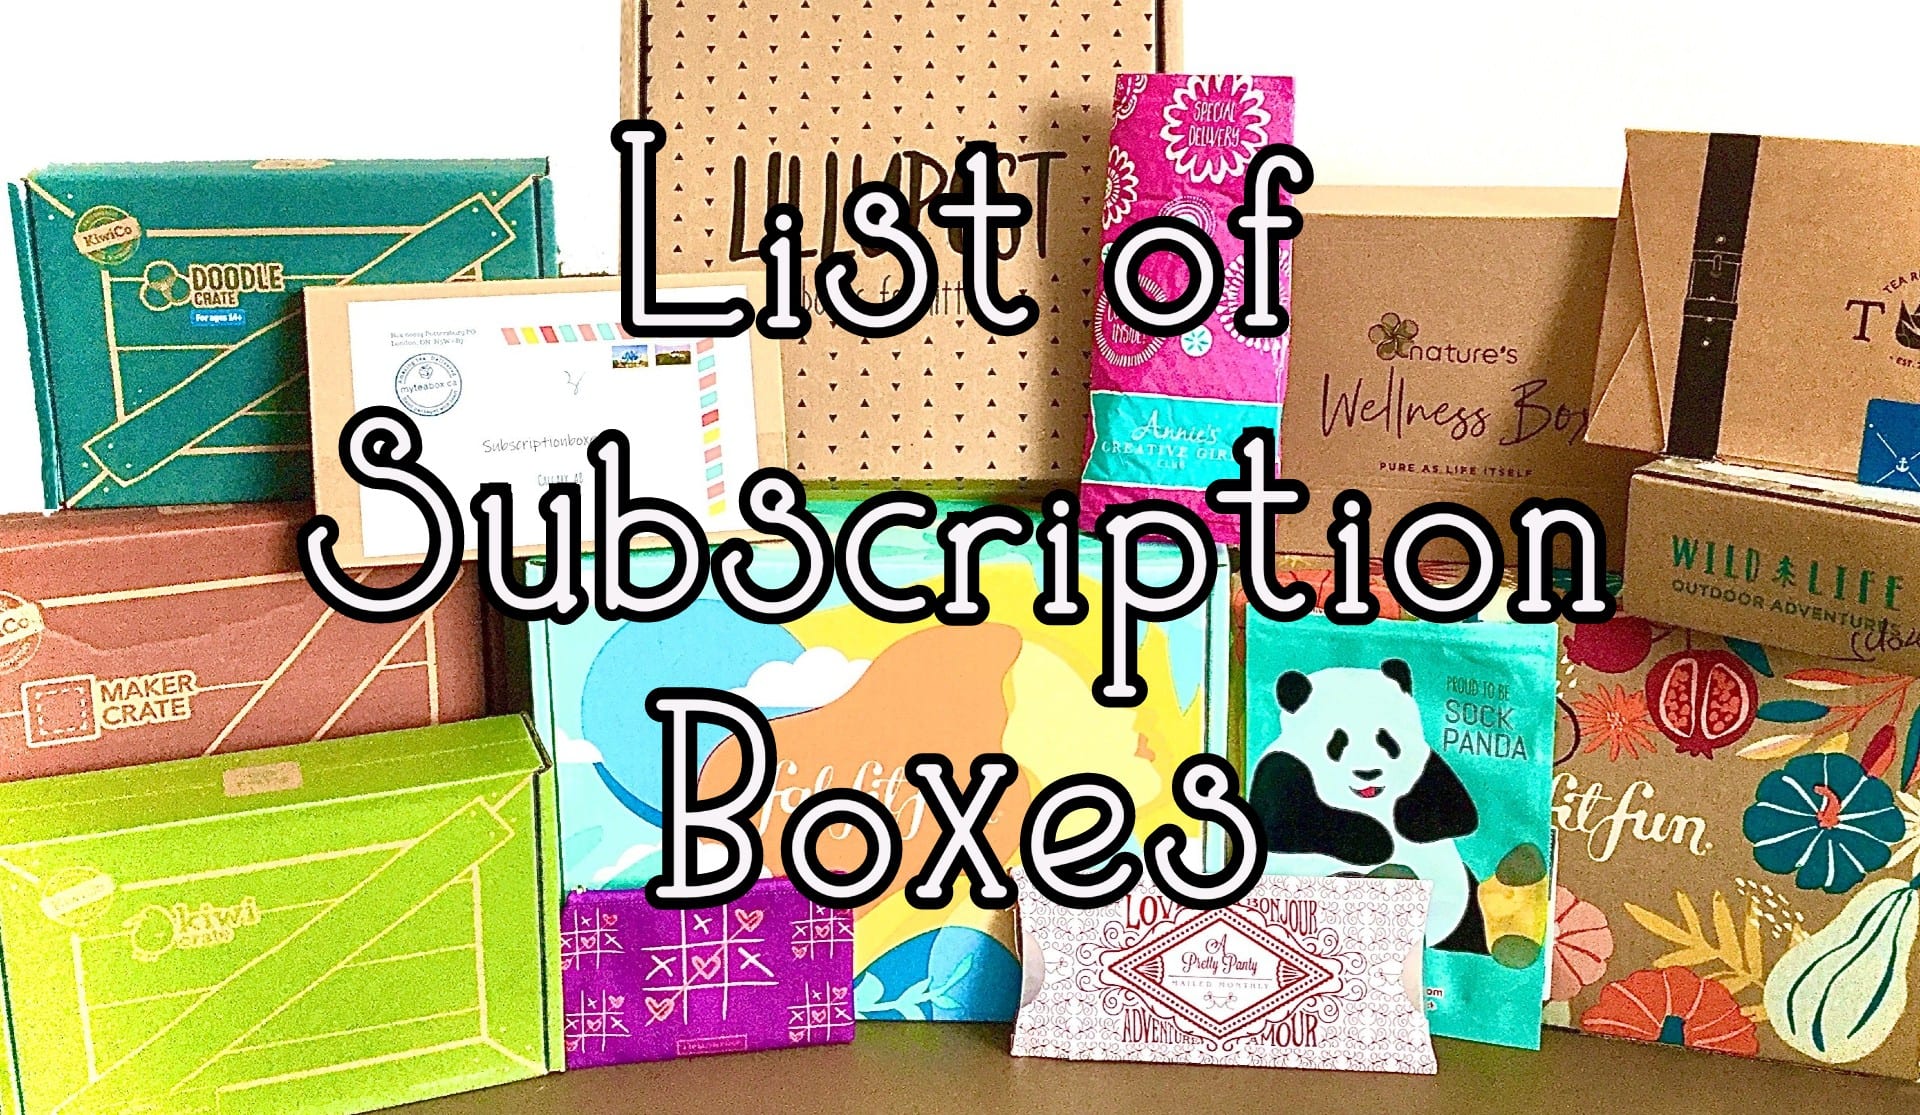 Top Five White-Haired Anime Boys - YumeTwins: The Monthly Kawaii  Subscription Box Straight from Tokyo to Your Door!